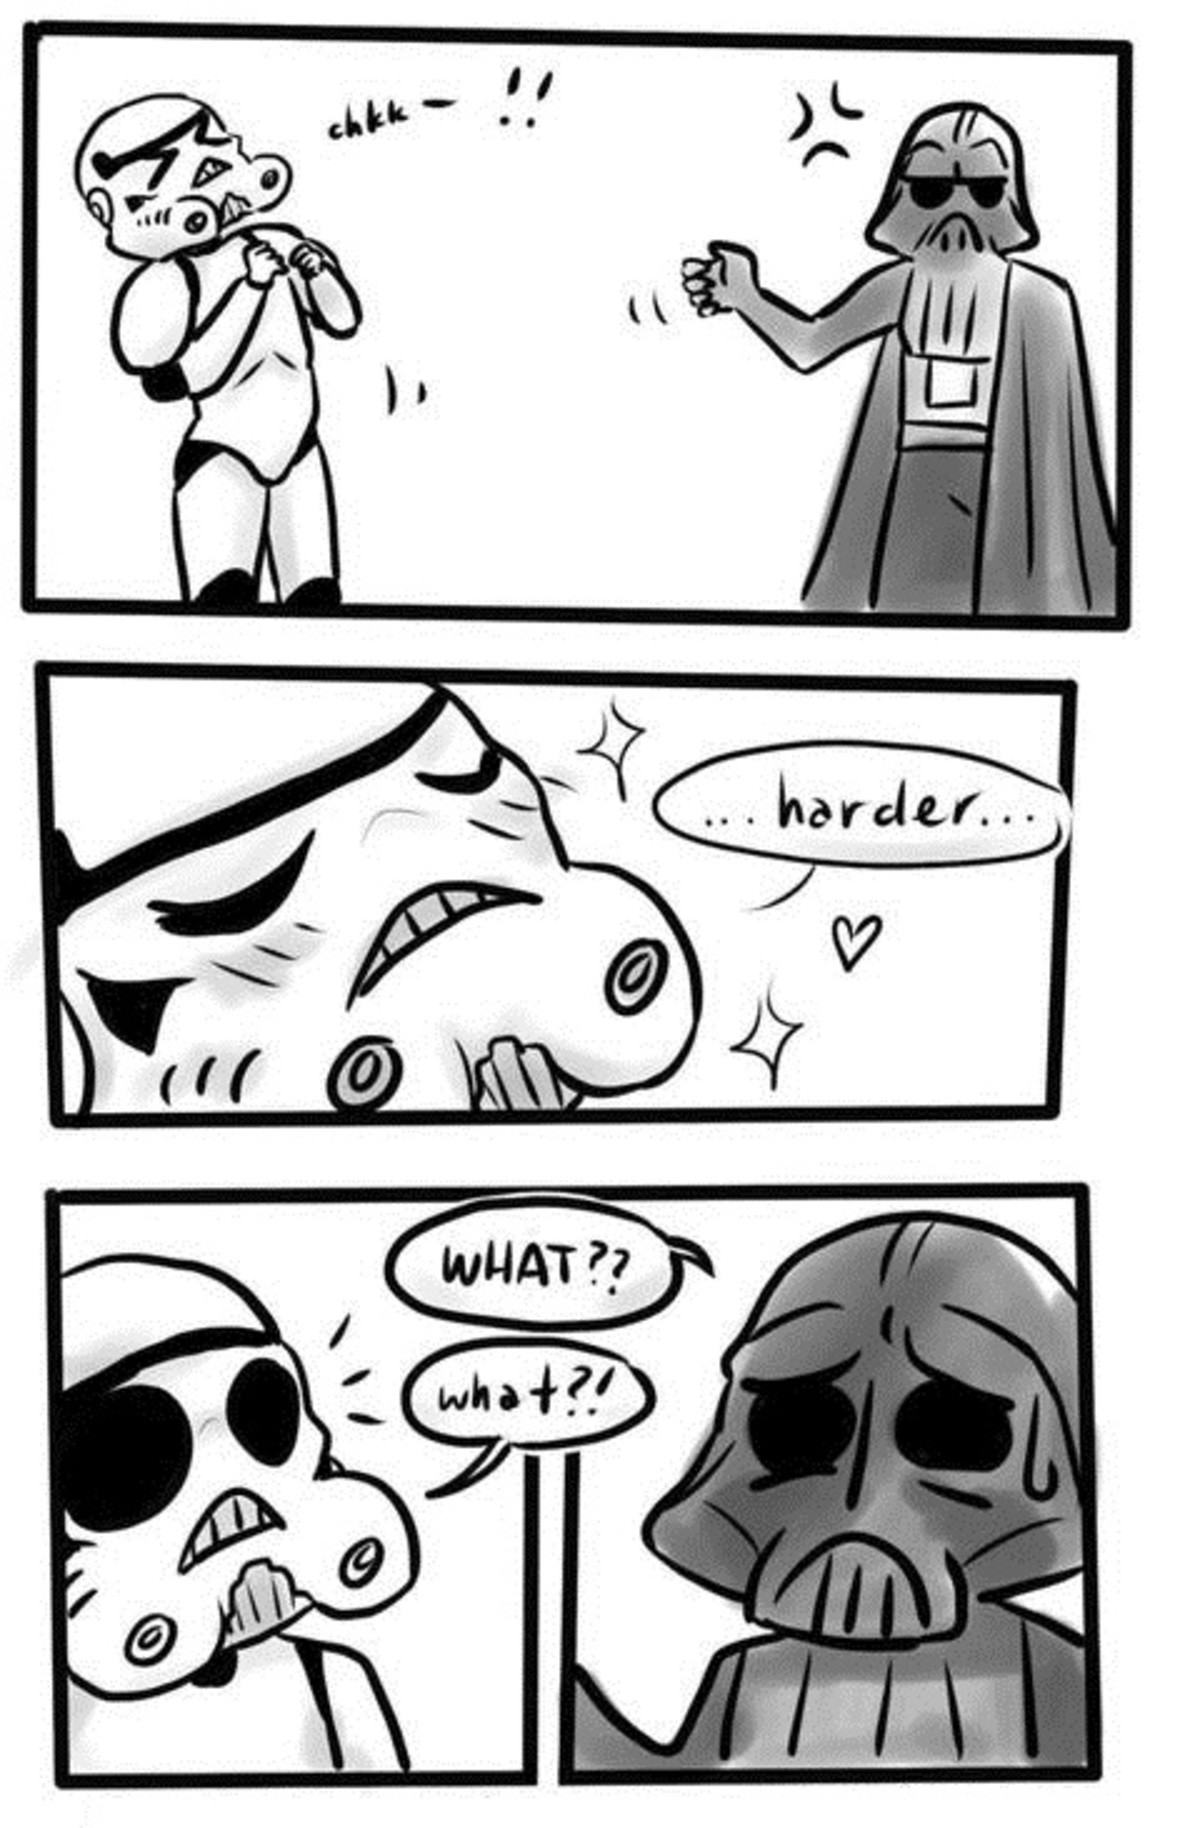 Oh yeah daddy Vader, choke me harder. 